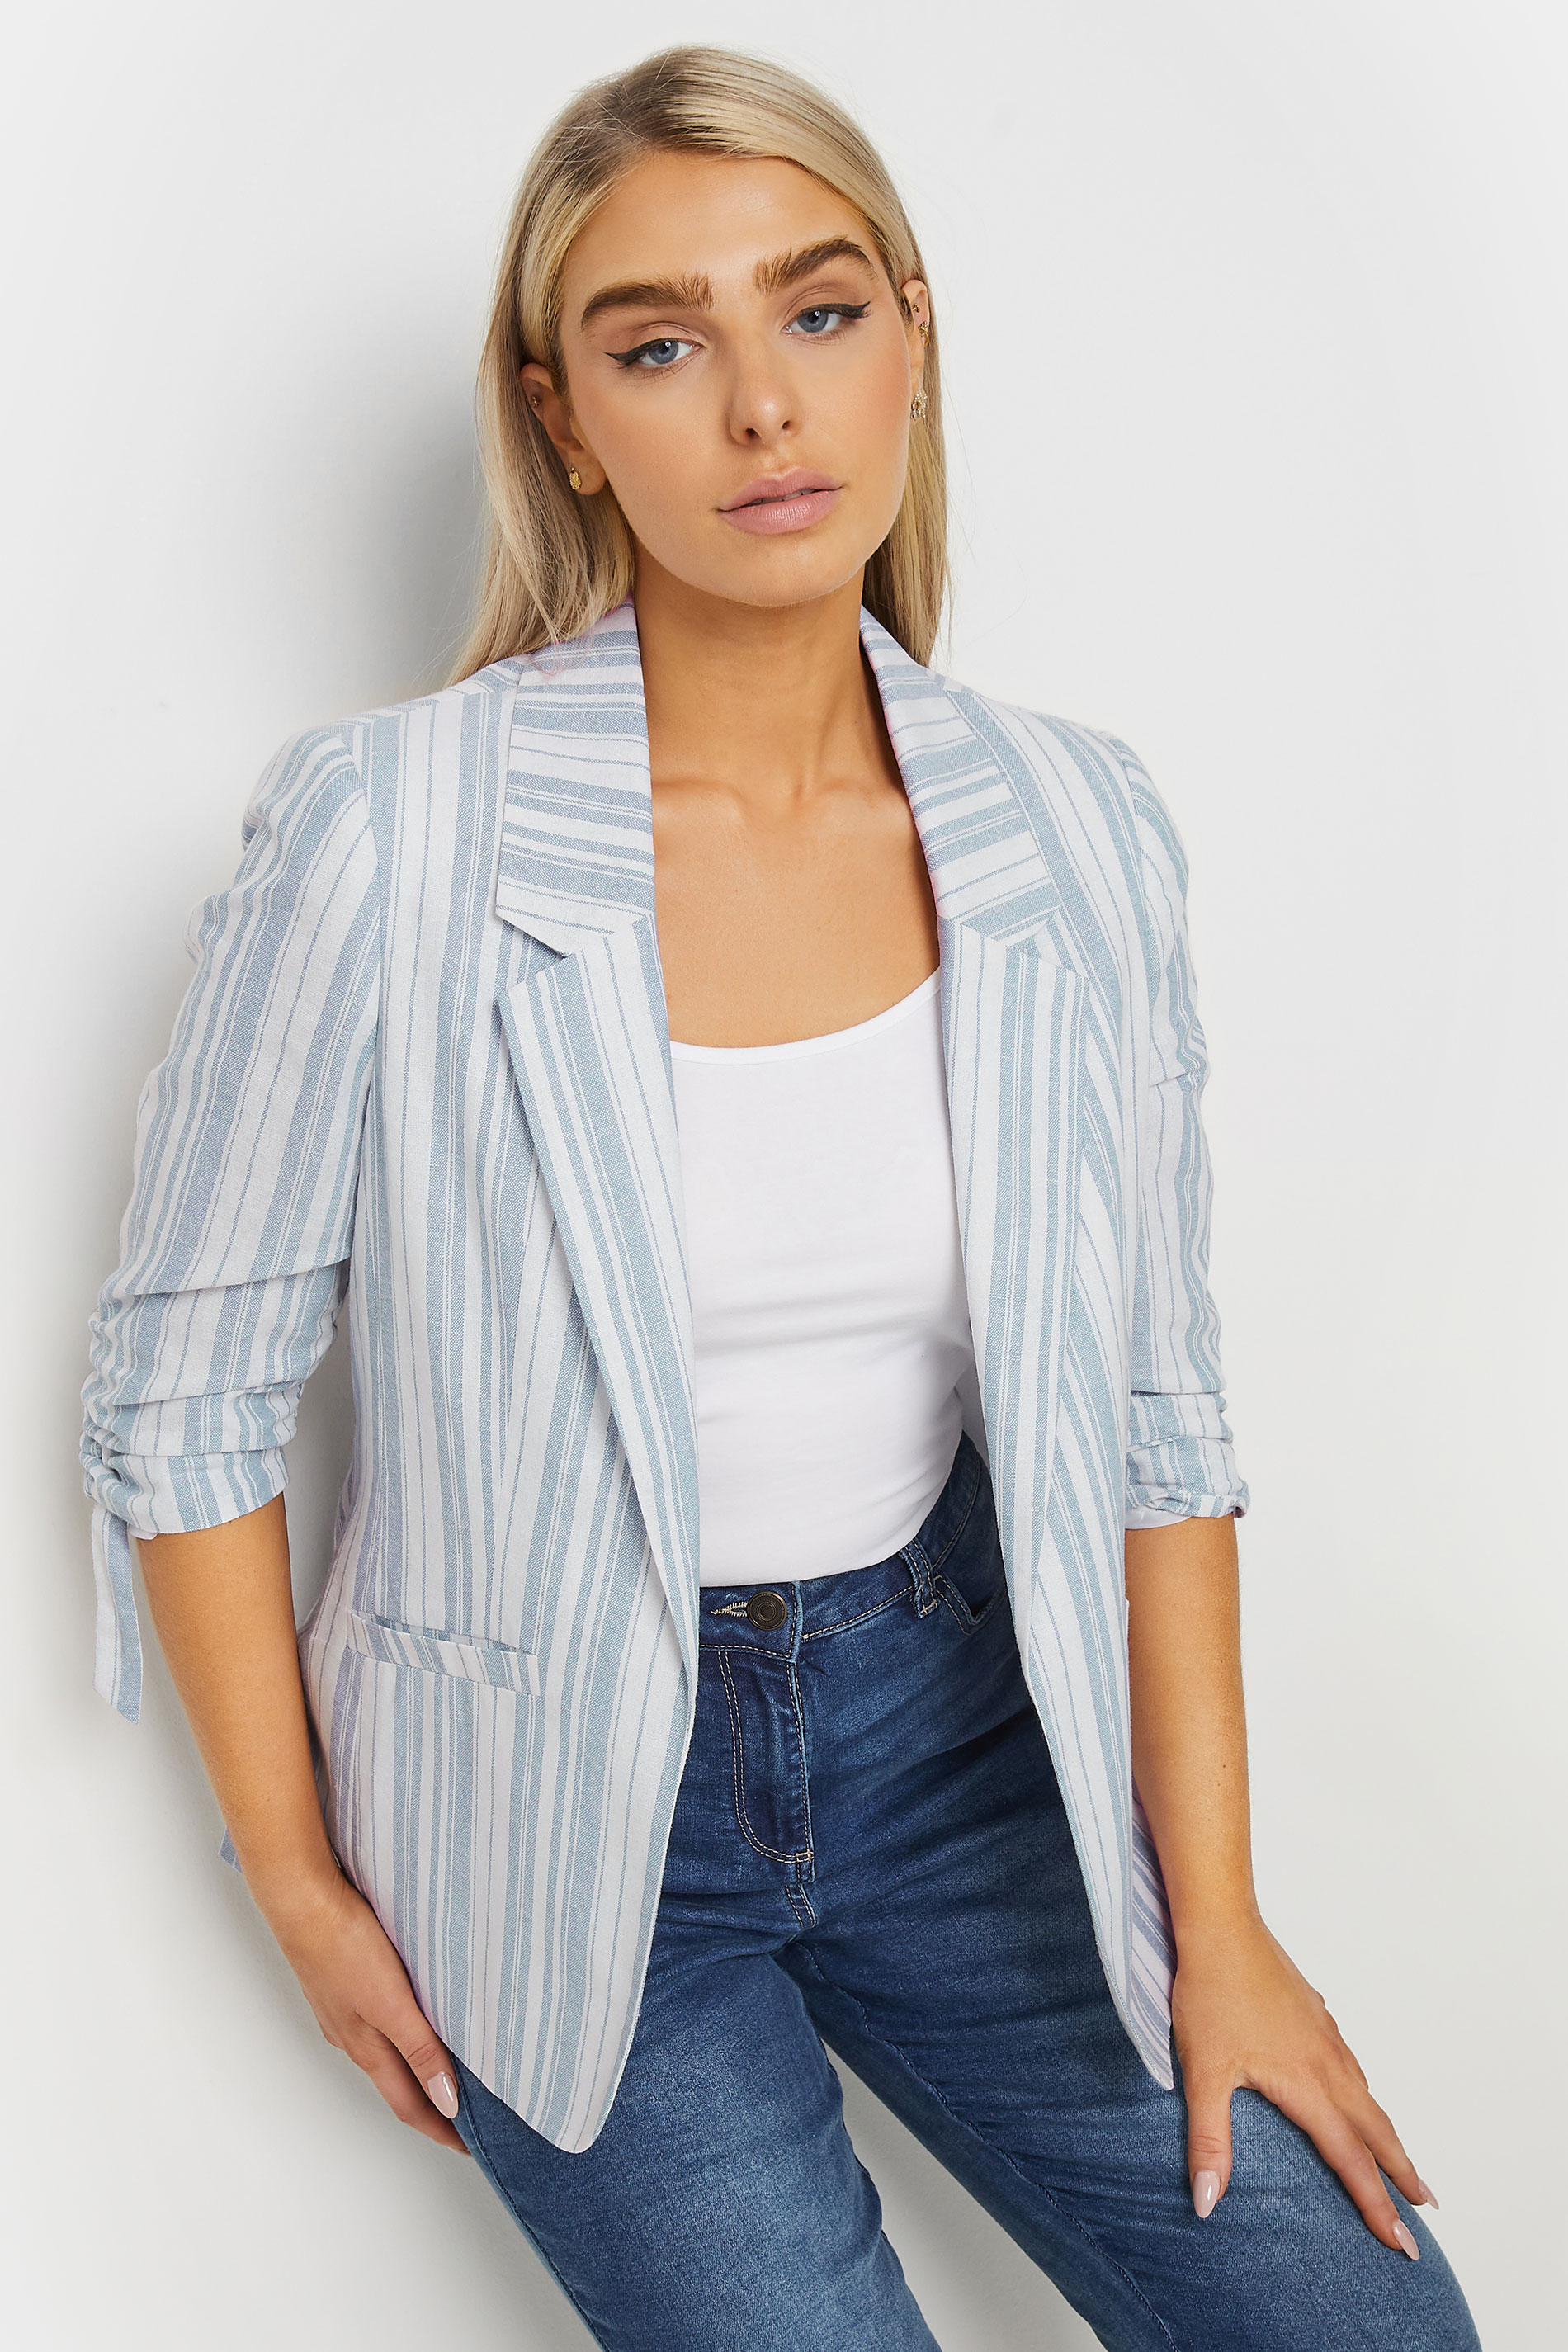 M&Co White & Blue Striped Ruched Sleeve Blazer | M&Co 1